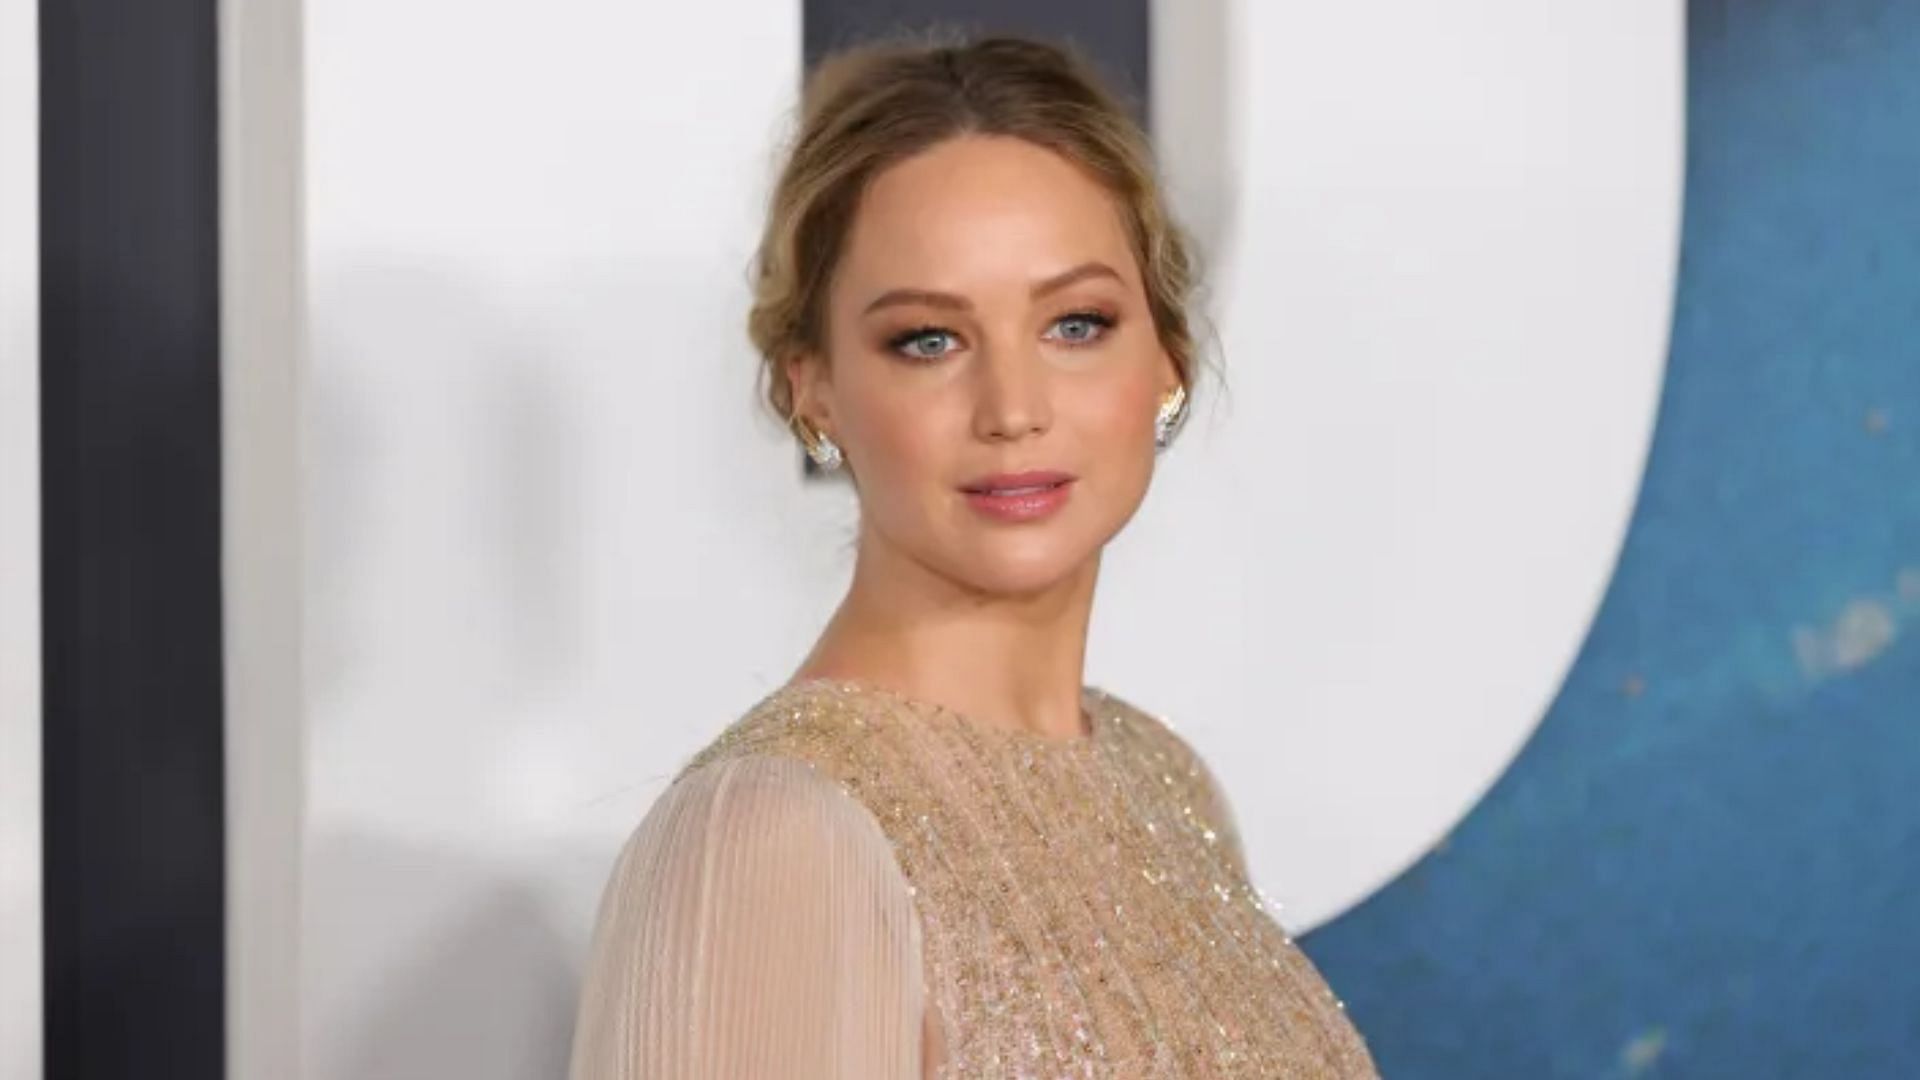 Jennifer Lawrence opens up about a rumor related to Harvey Weinstein. (Image via Dia Dipasupil/Getty Images)